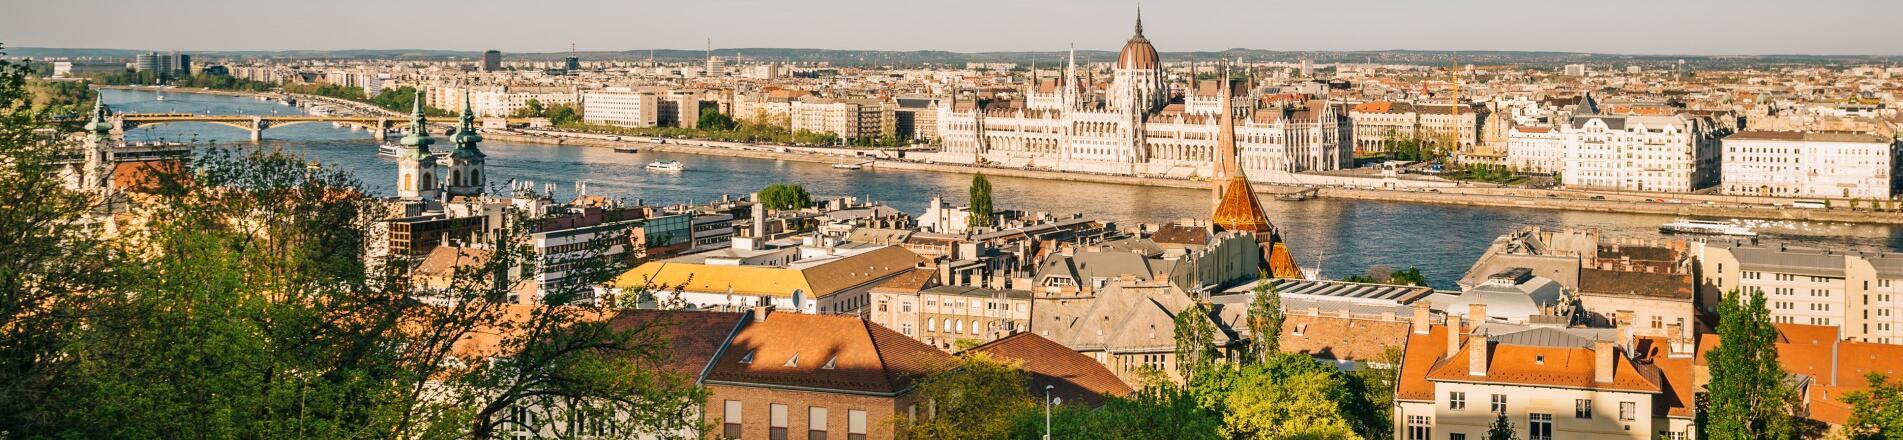 How to get to our hotels in the Buda Castle